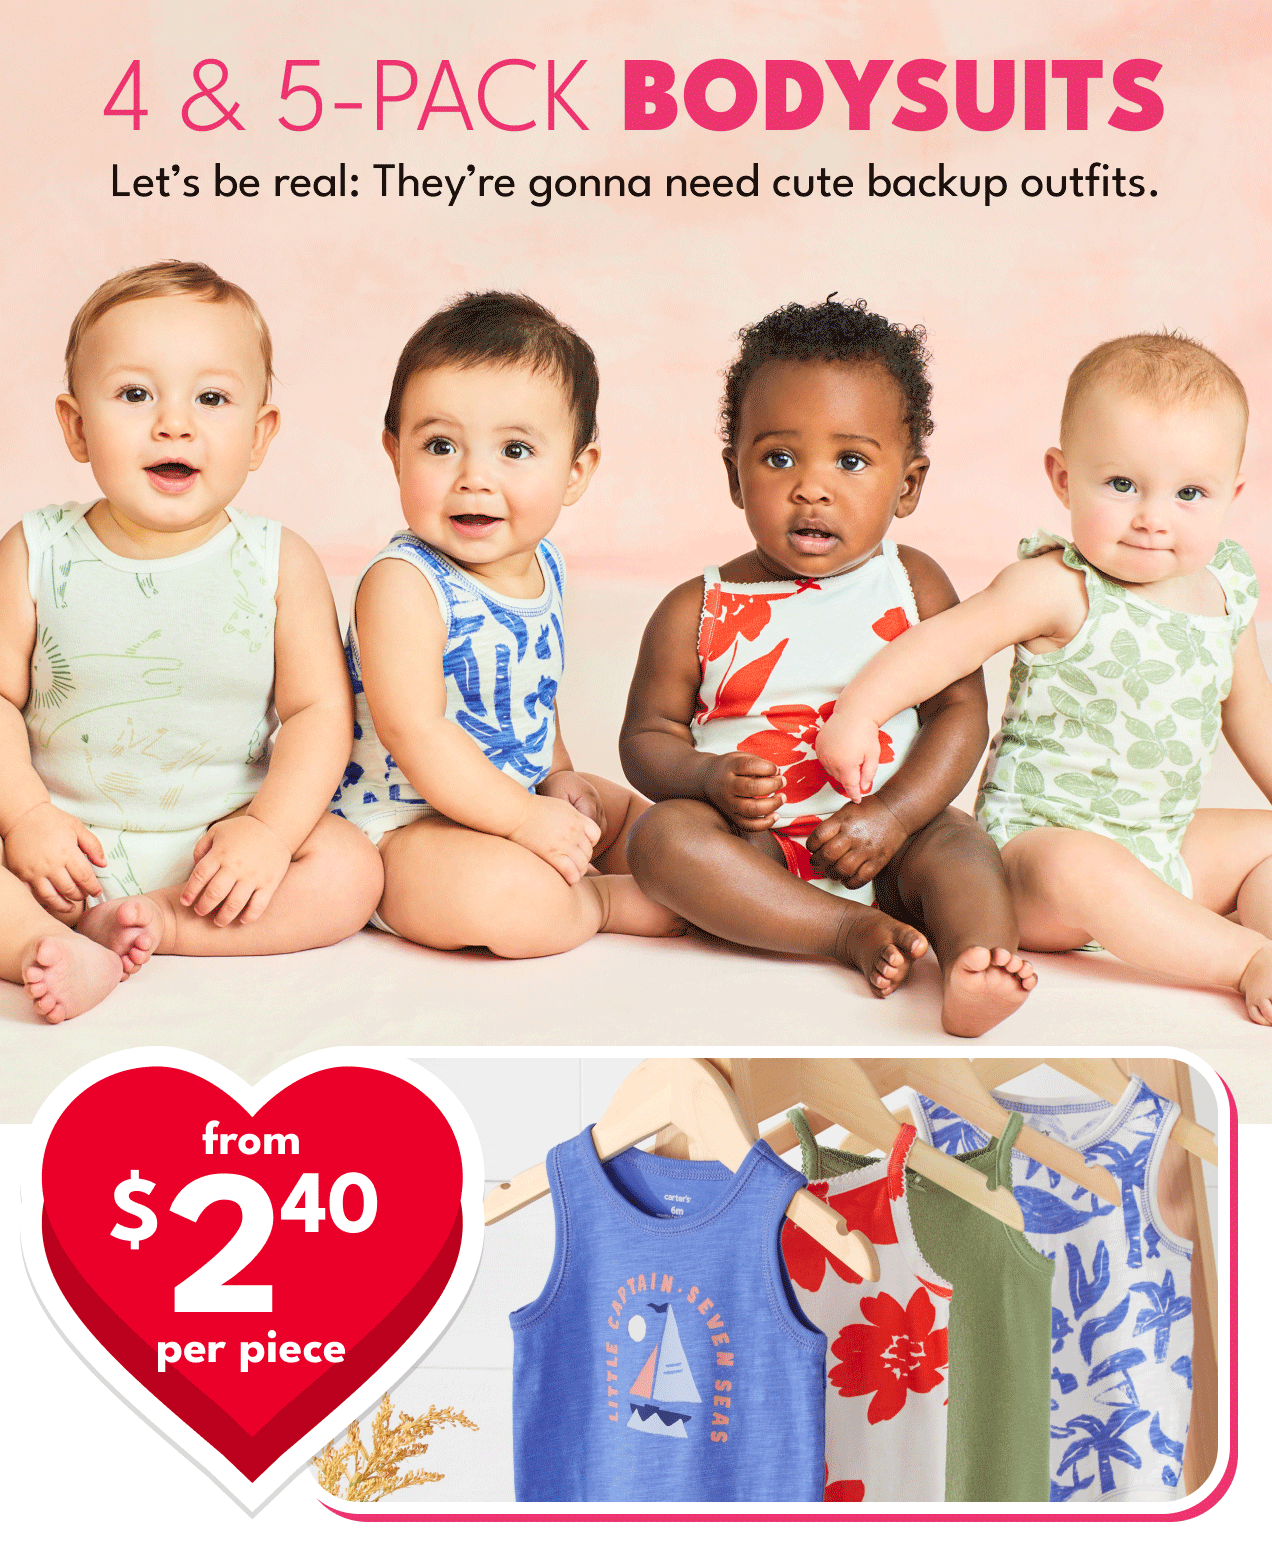 4 & 5-PACK BODYSUITS | Let's be real: They're gonna need cute backup outfits. | \\$12 & UP | from \\$2.40 per piece